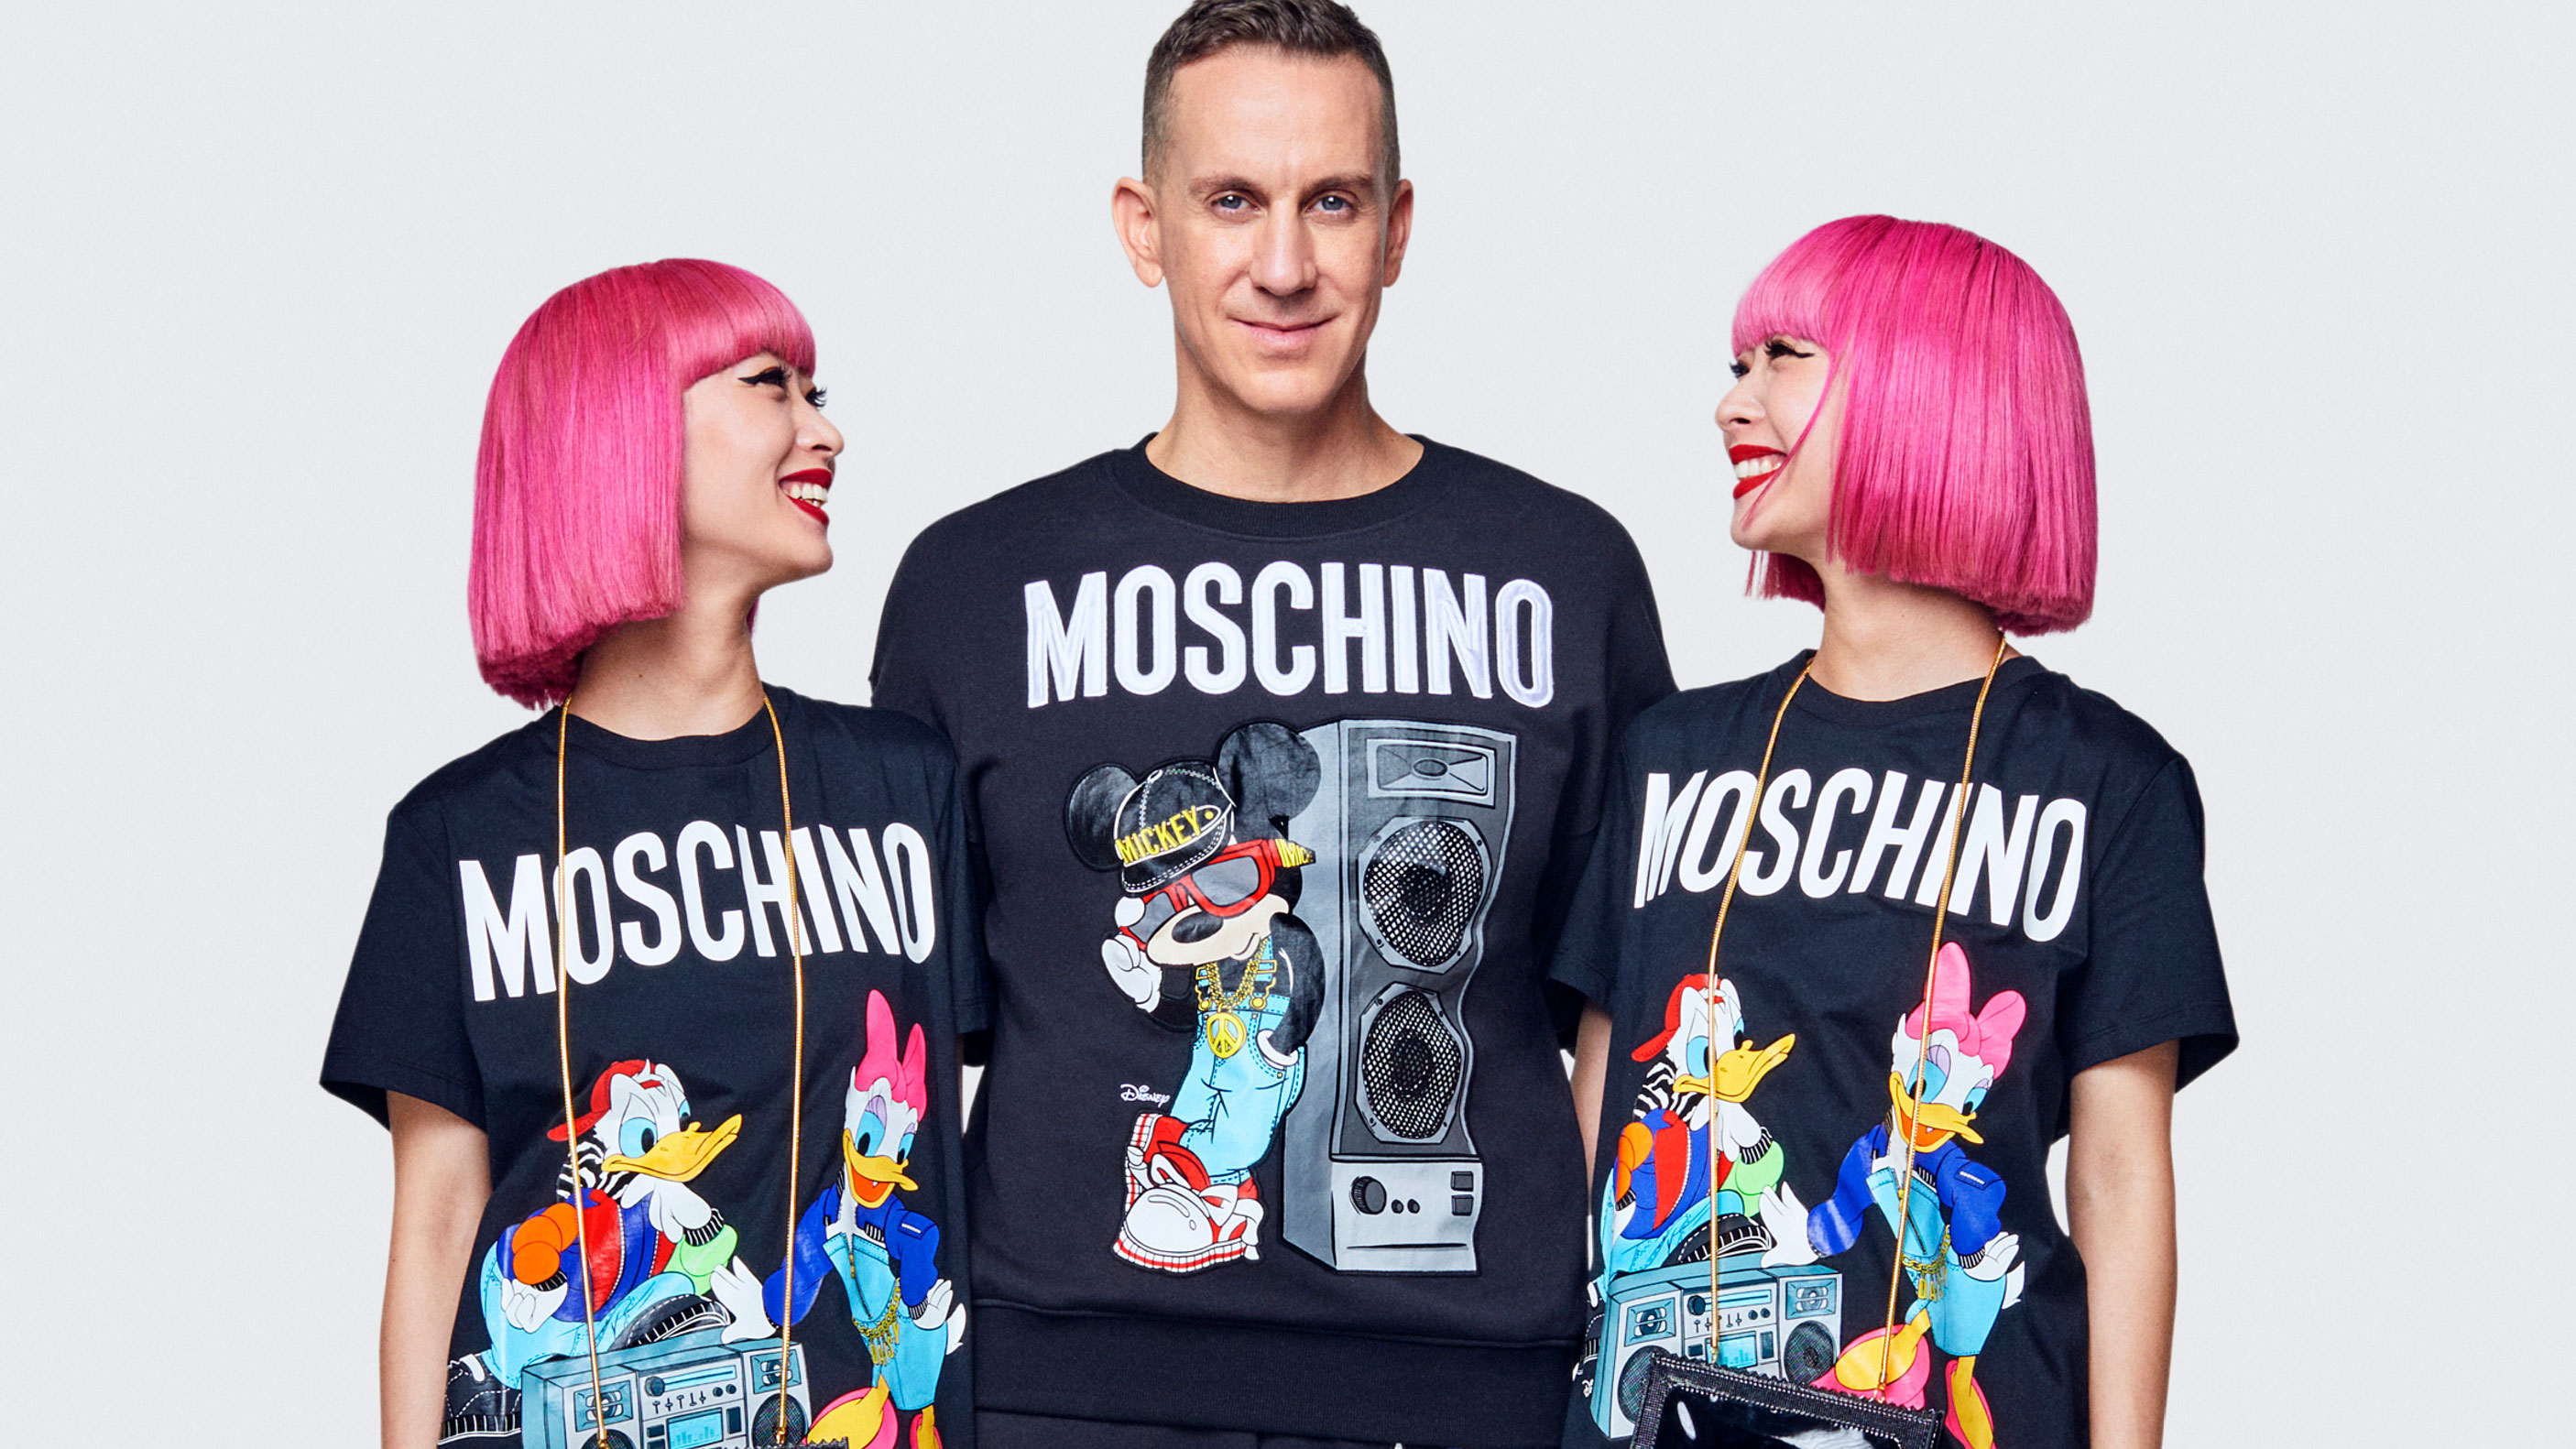 H\u0026M's Moschino collaboration launches 